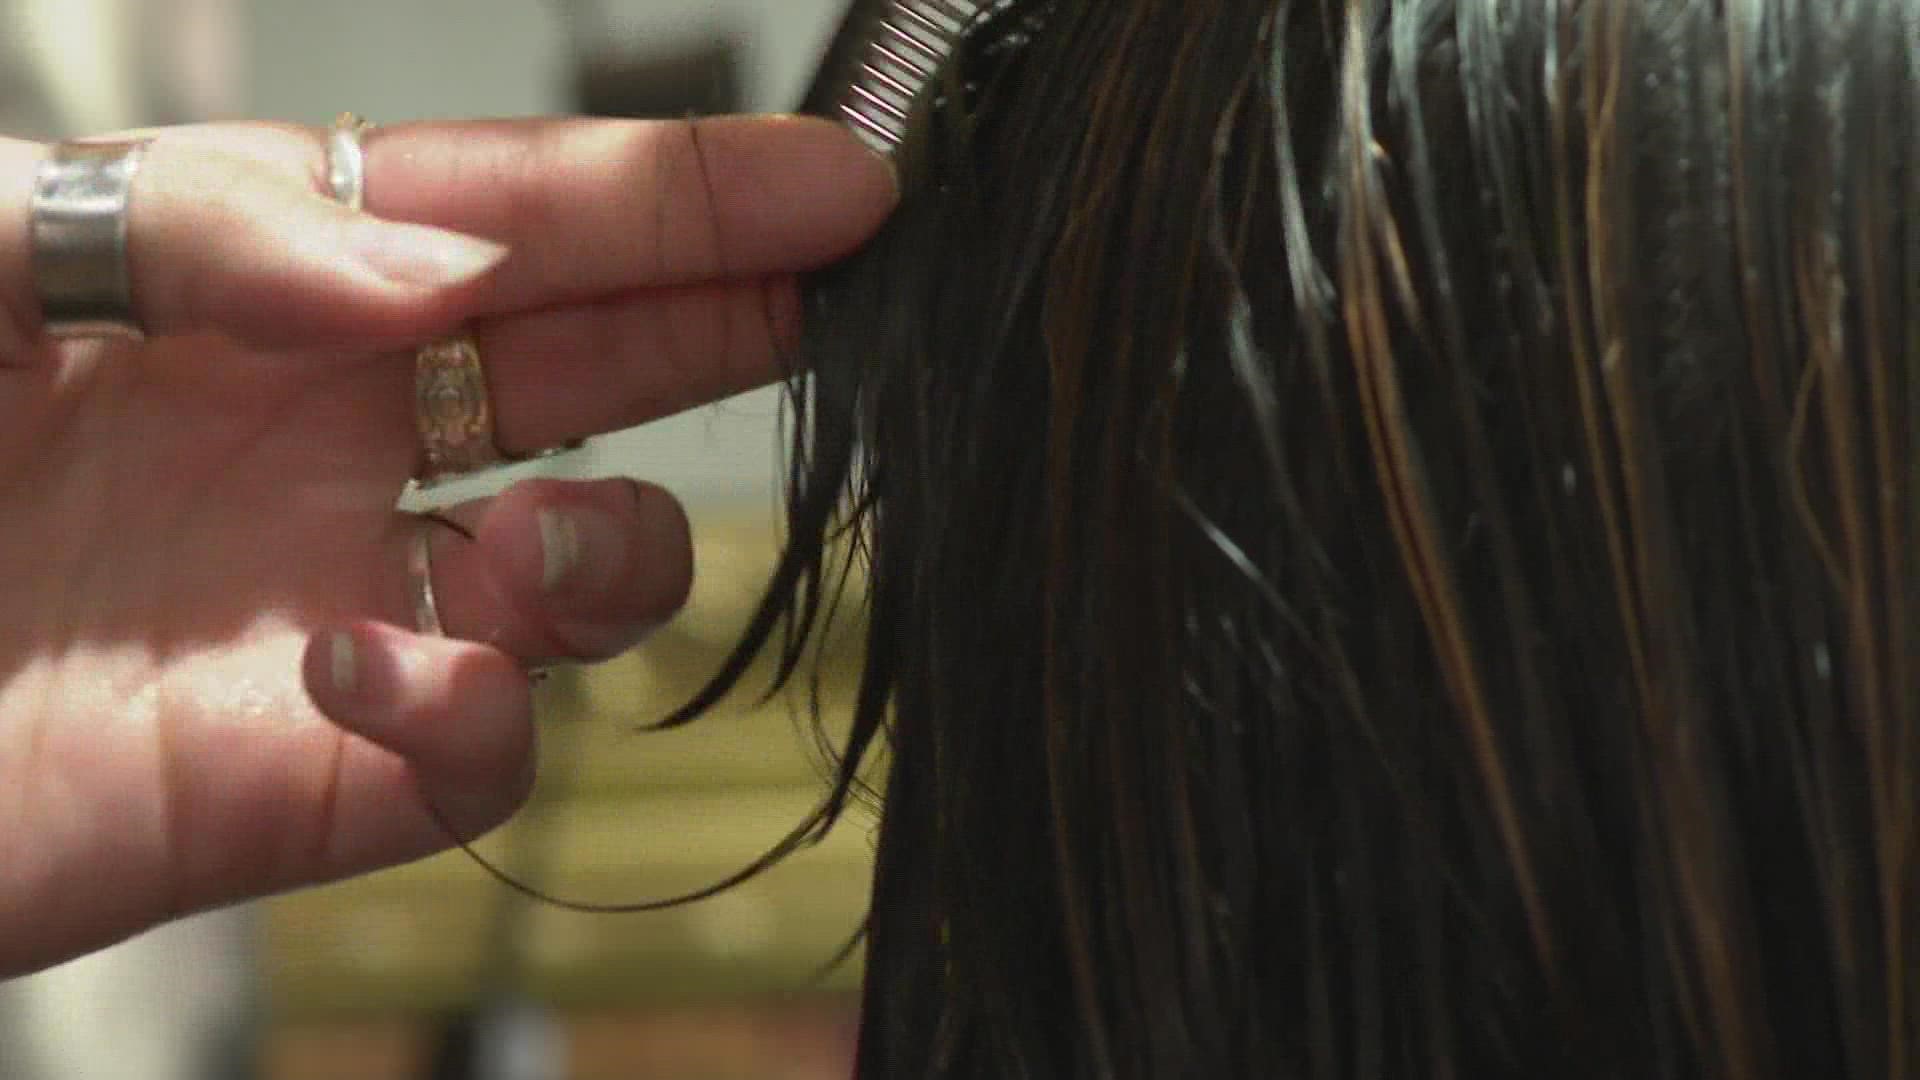 A local hair stylist is focusing on the LGBTQ+ community. She is hoping non-gender pricing is embraced in all hair salons.